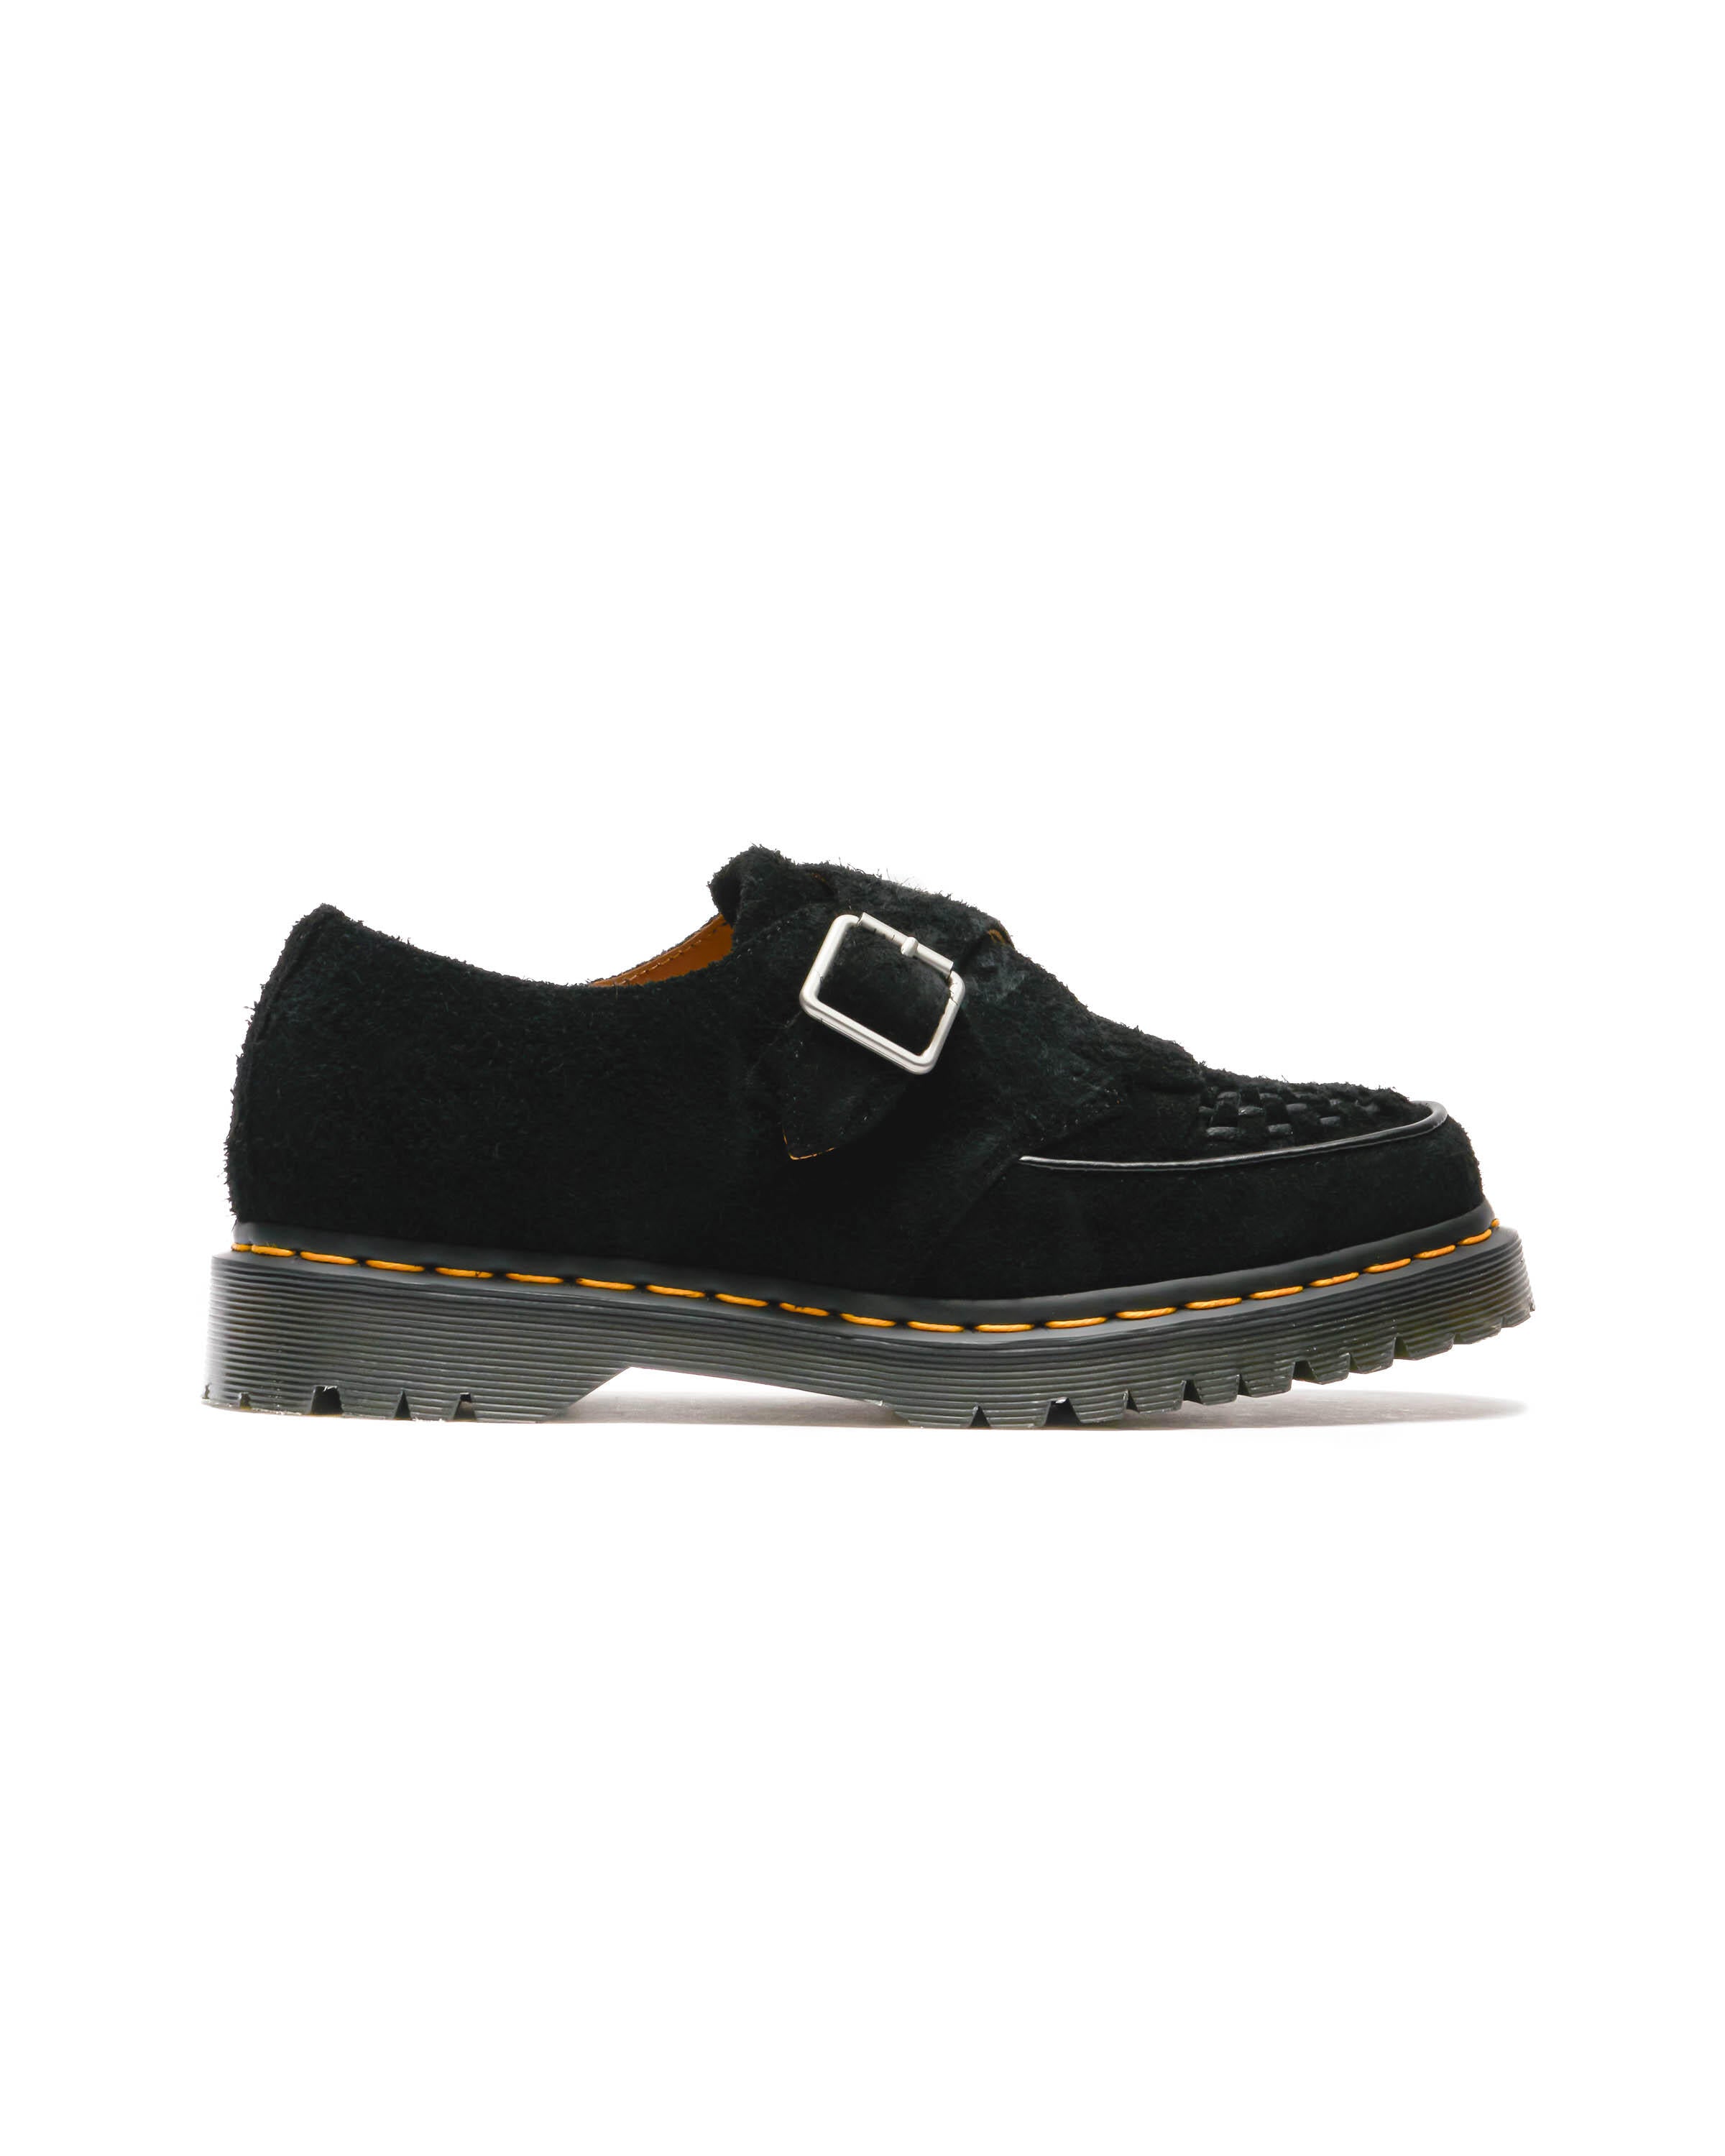 Dr. Martens | Sneakers & Apparel | AFEW STORE